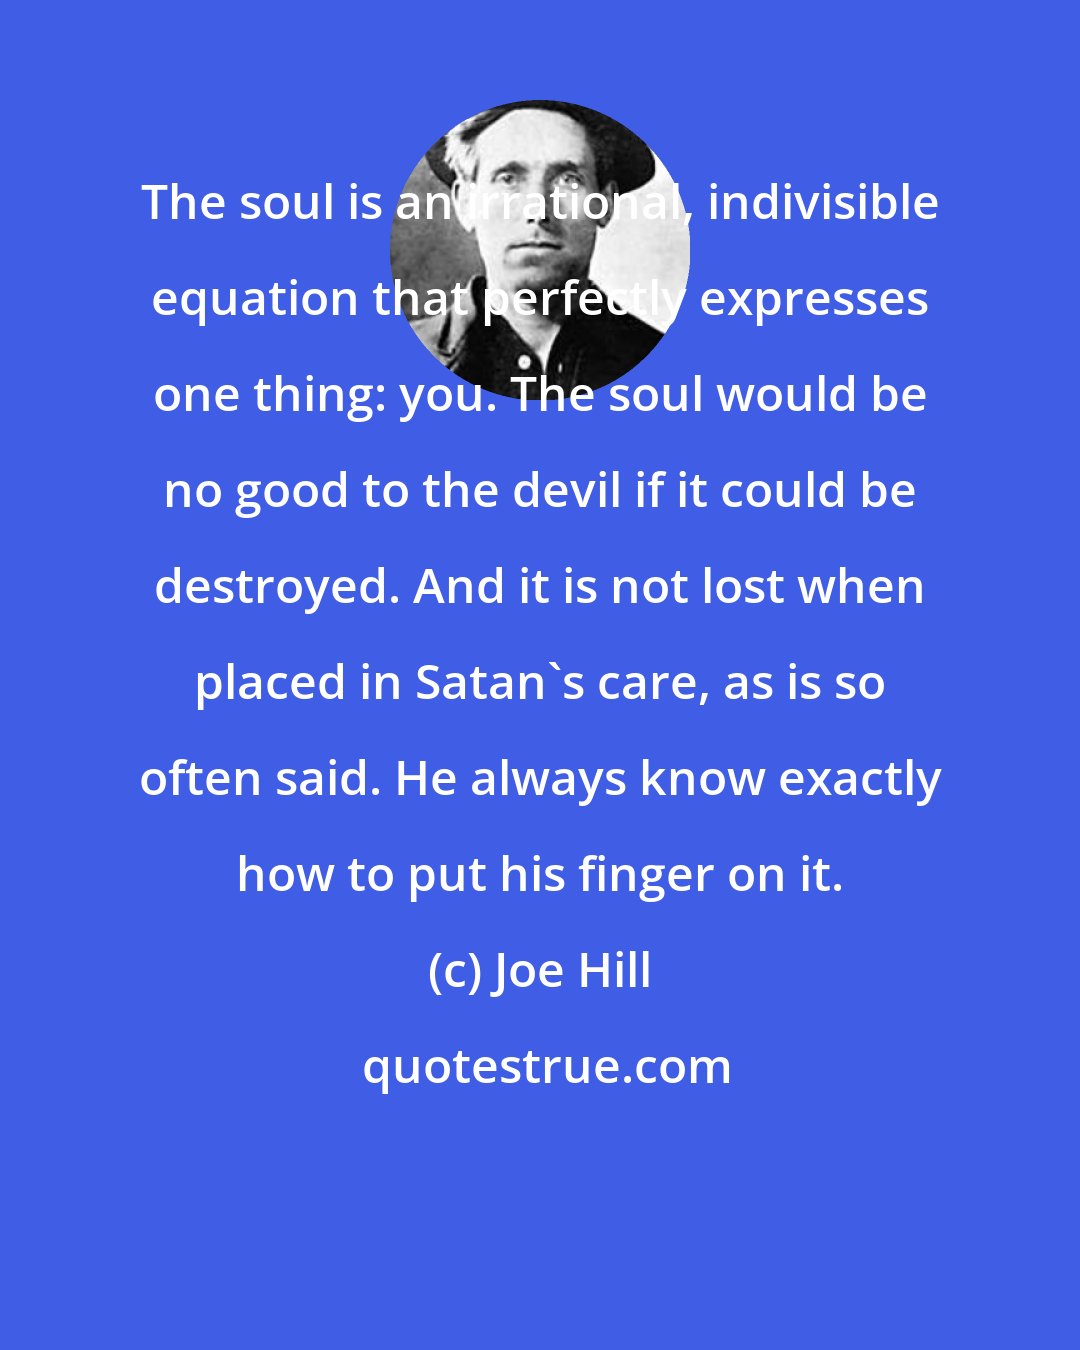 Joe Hill: The soul is an irrational, indivisible equation that perfectly expresses one thing: you. The soul would be no good to the devil if it could be destroyed. And it is not lost when placed in Satan's care, as is so often said. He always know exactly how to put his finger on it.